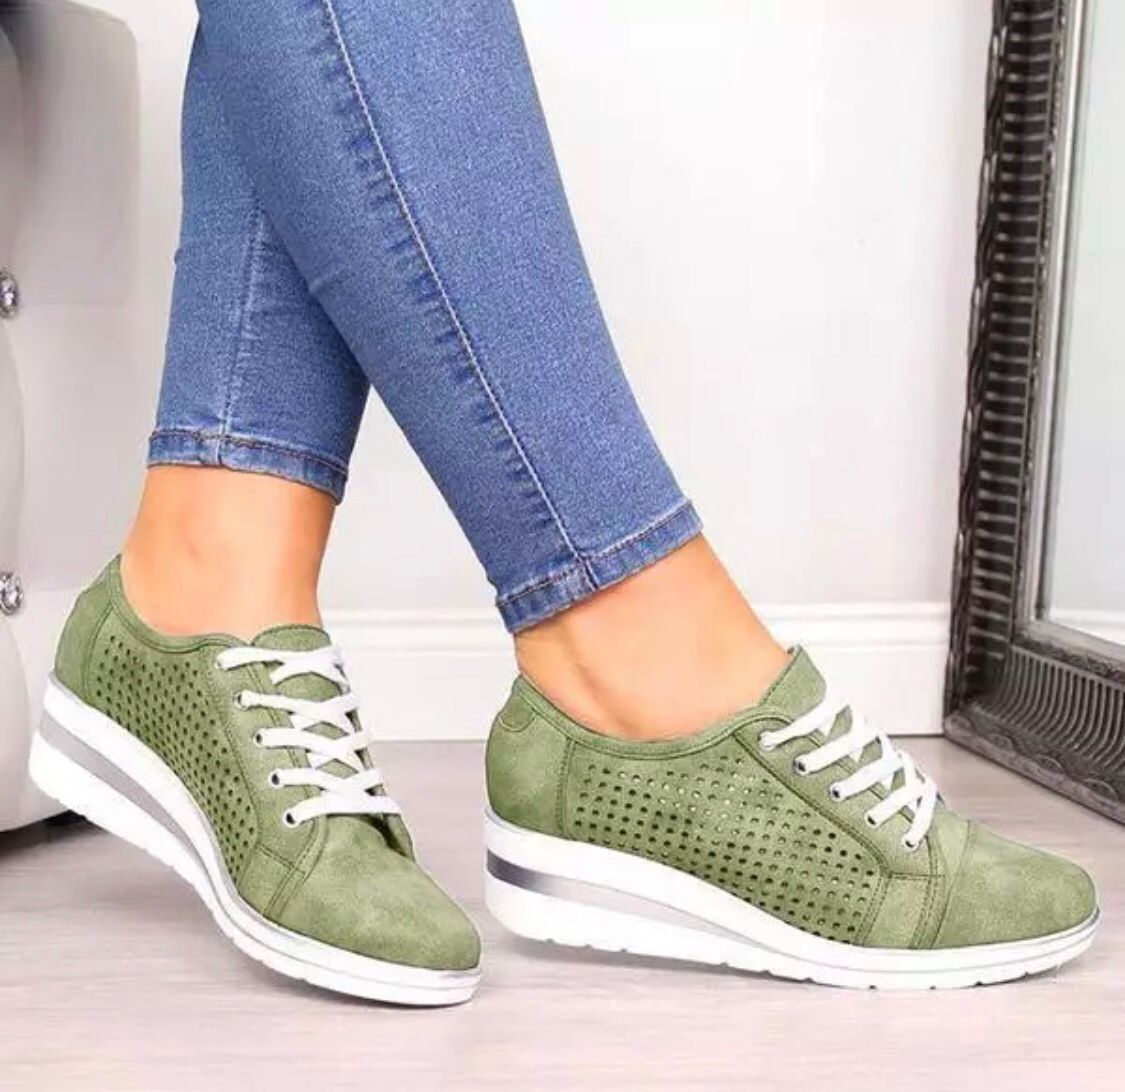 2022 Hot Sale Women's Flat Shoes Summer Mesh Breathable Casual Flats Sneakers(Buy 2 get 10% off)